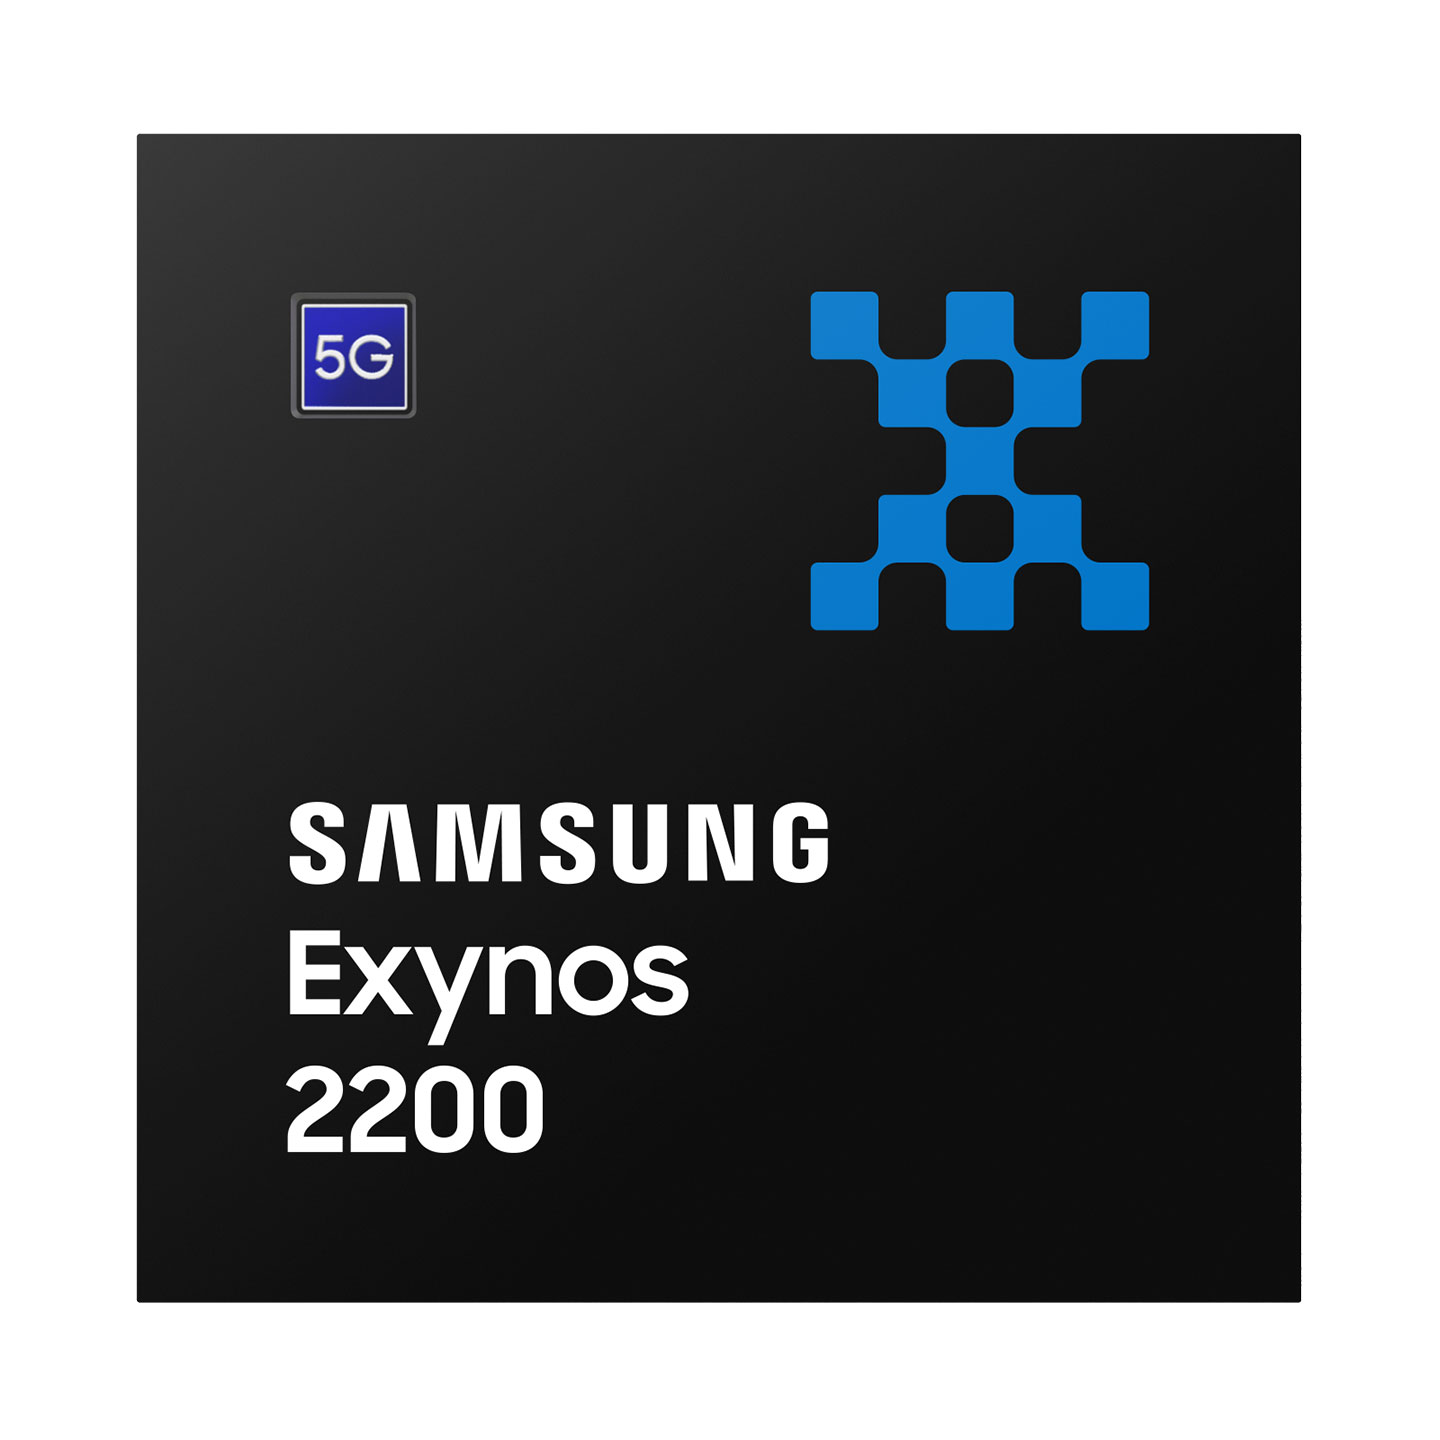 Samsung launches 4nm Exynos 2200 SoC to redefine mobile gaming experience